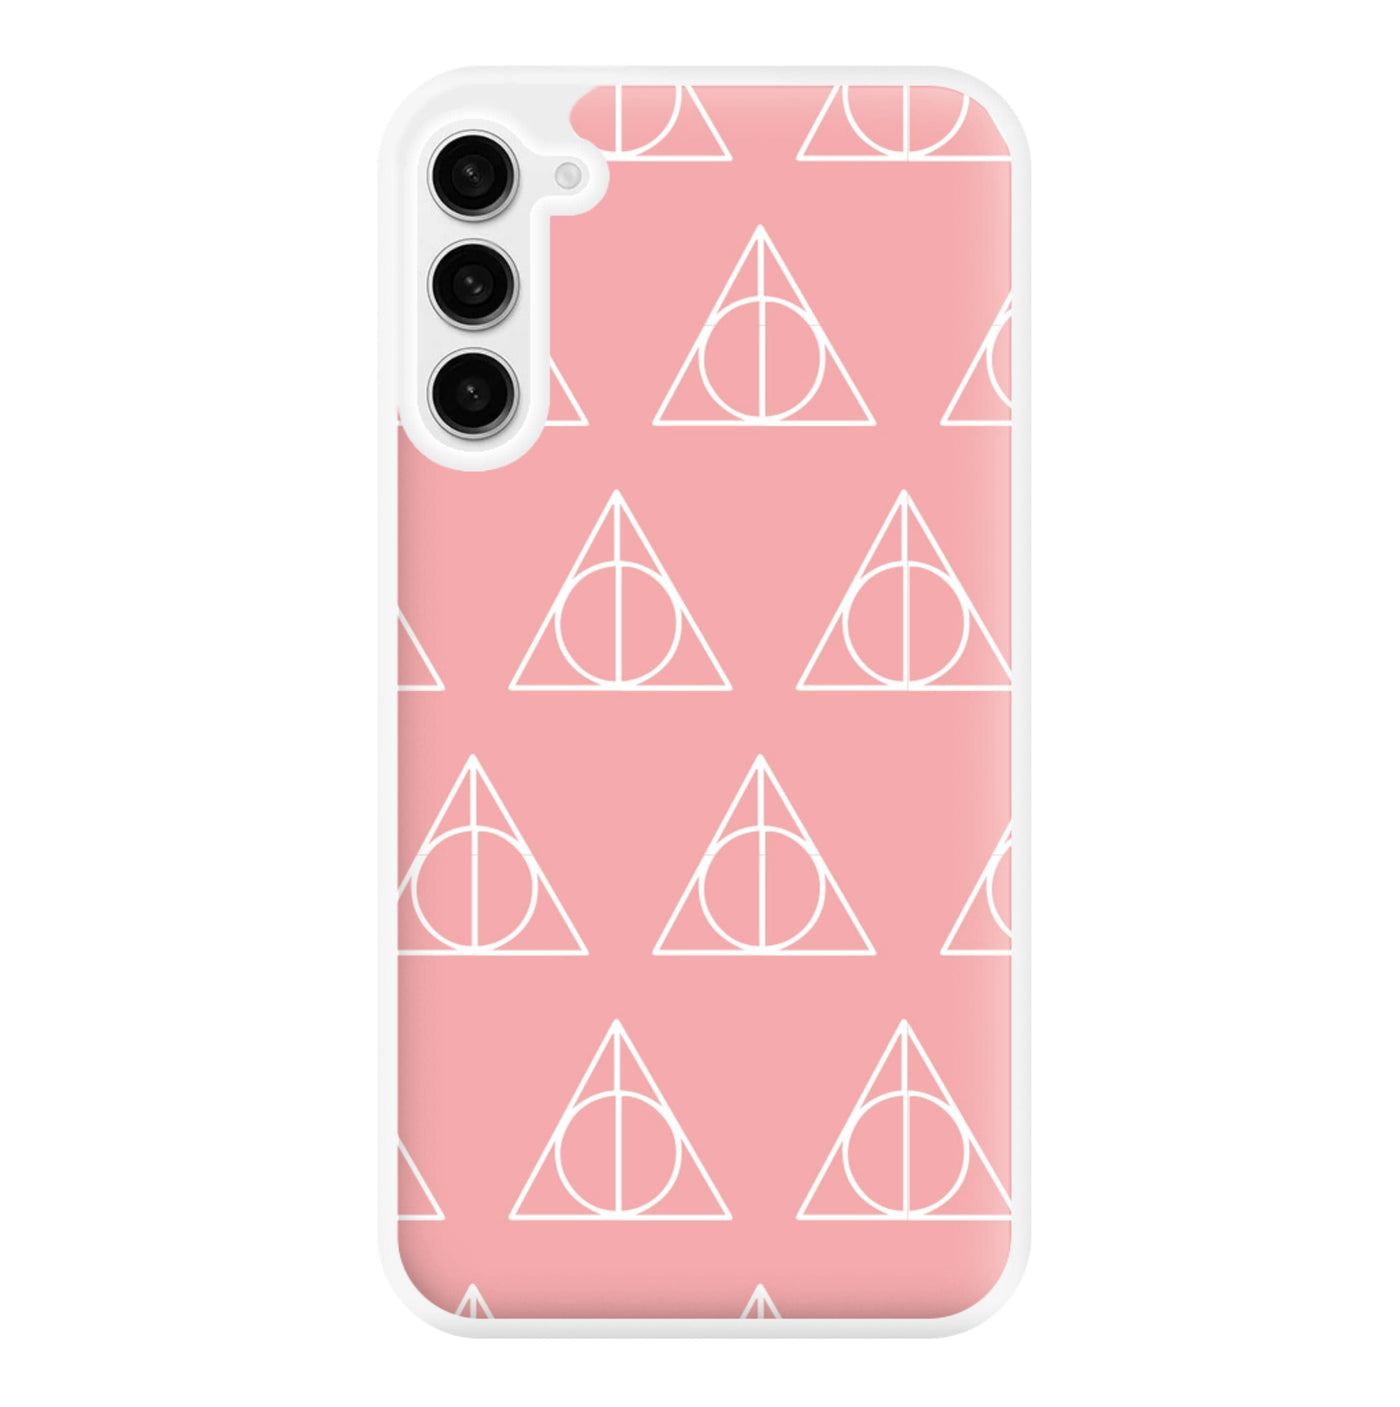 The Deathly Hallows Symbol Pattern - Harry Potter Phone Case